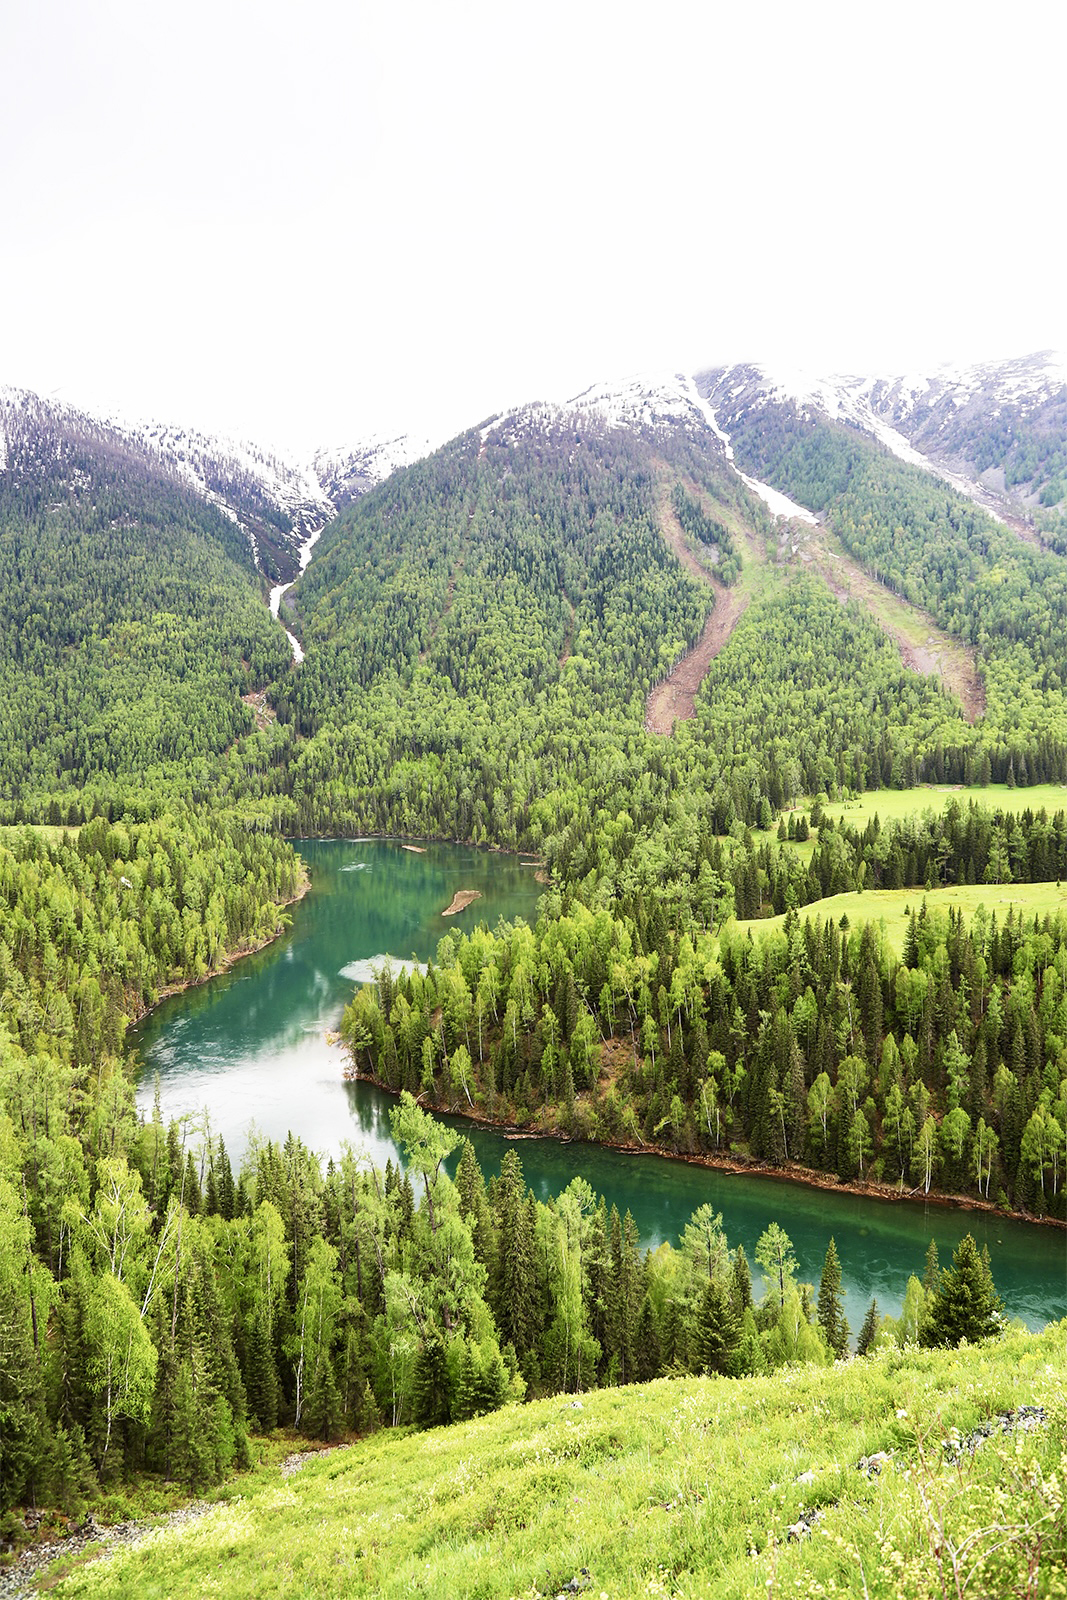 A view of Moon Bay on the Kanas River in Altay, Xinjiang /CGTN